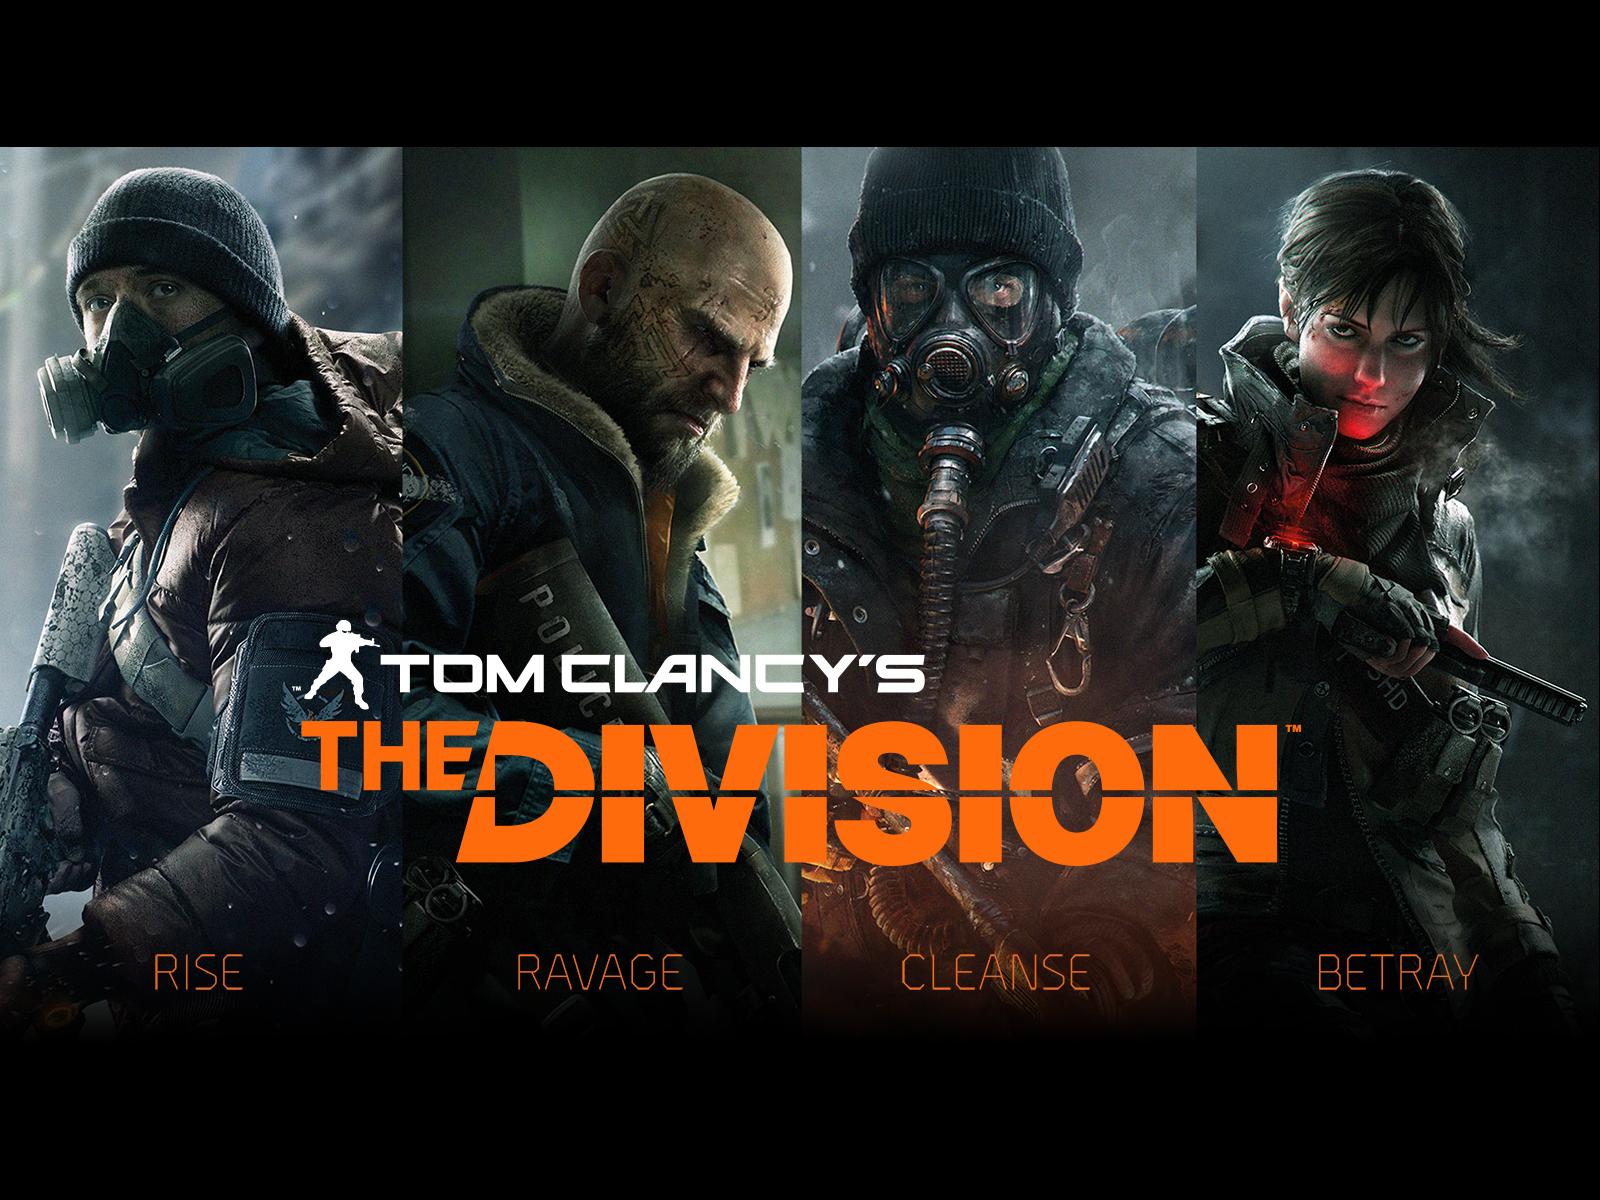 tom clancy's the division pc crack game